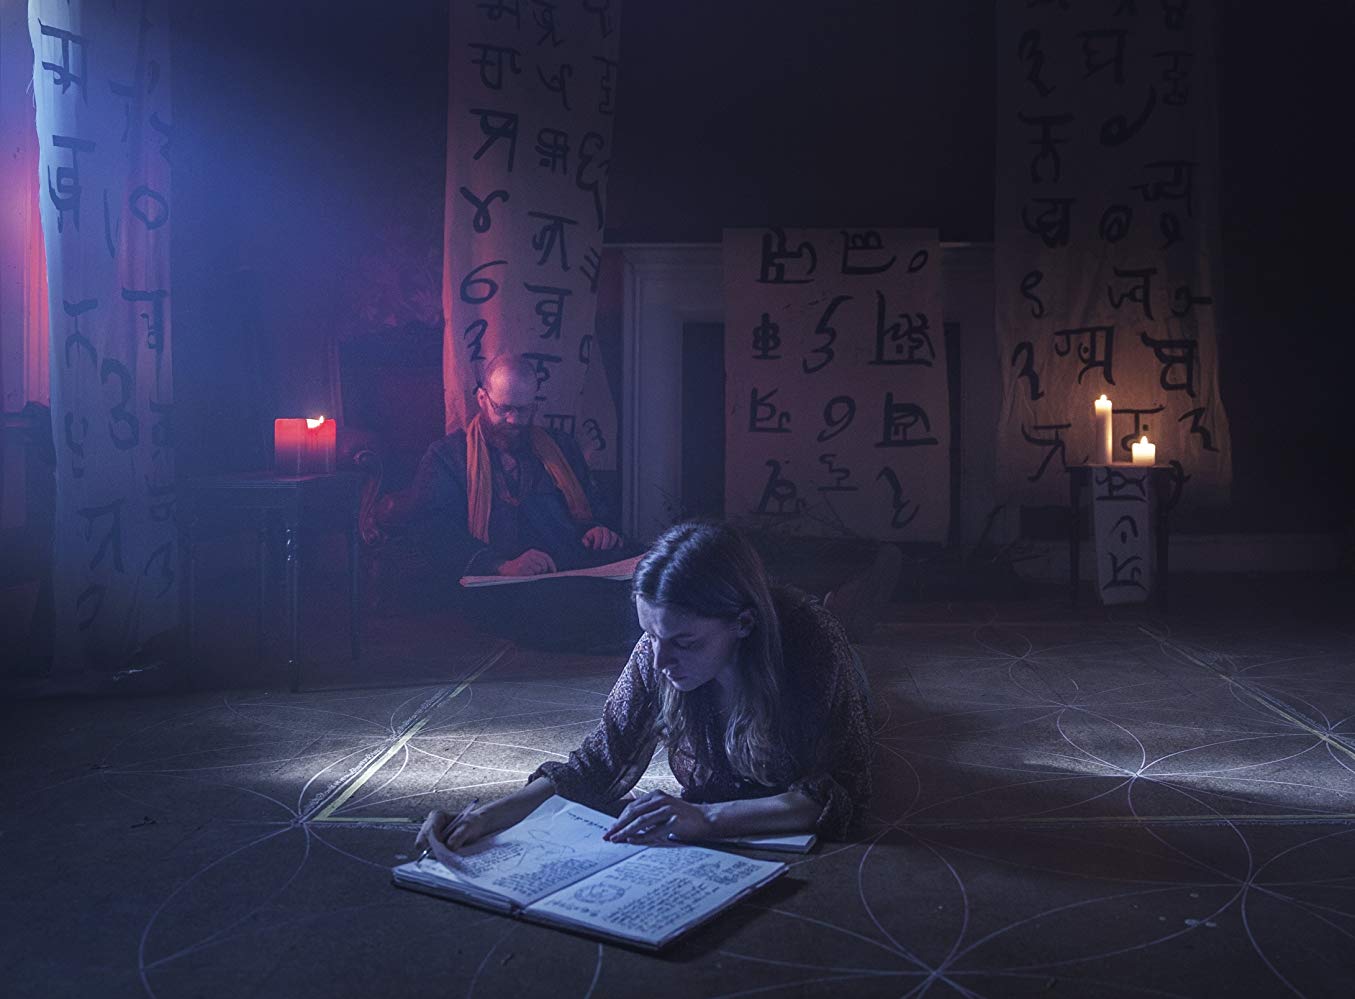 This is a still image from the movie A Dark Song.